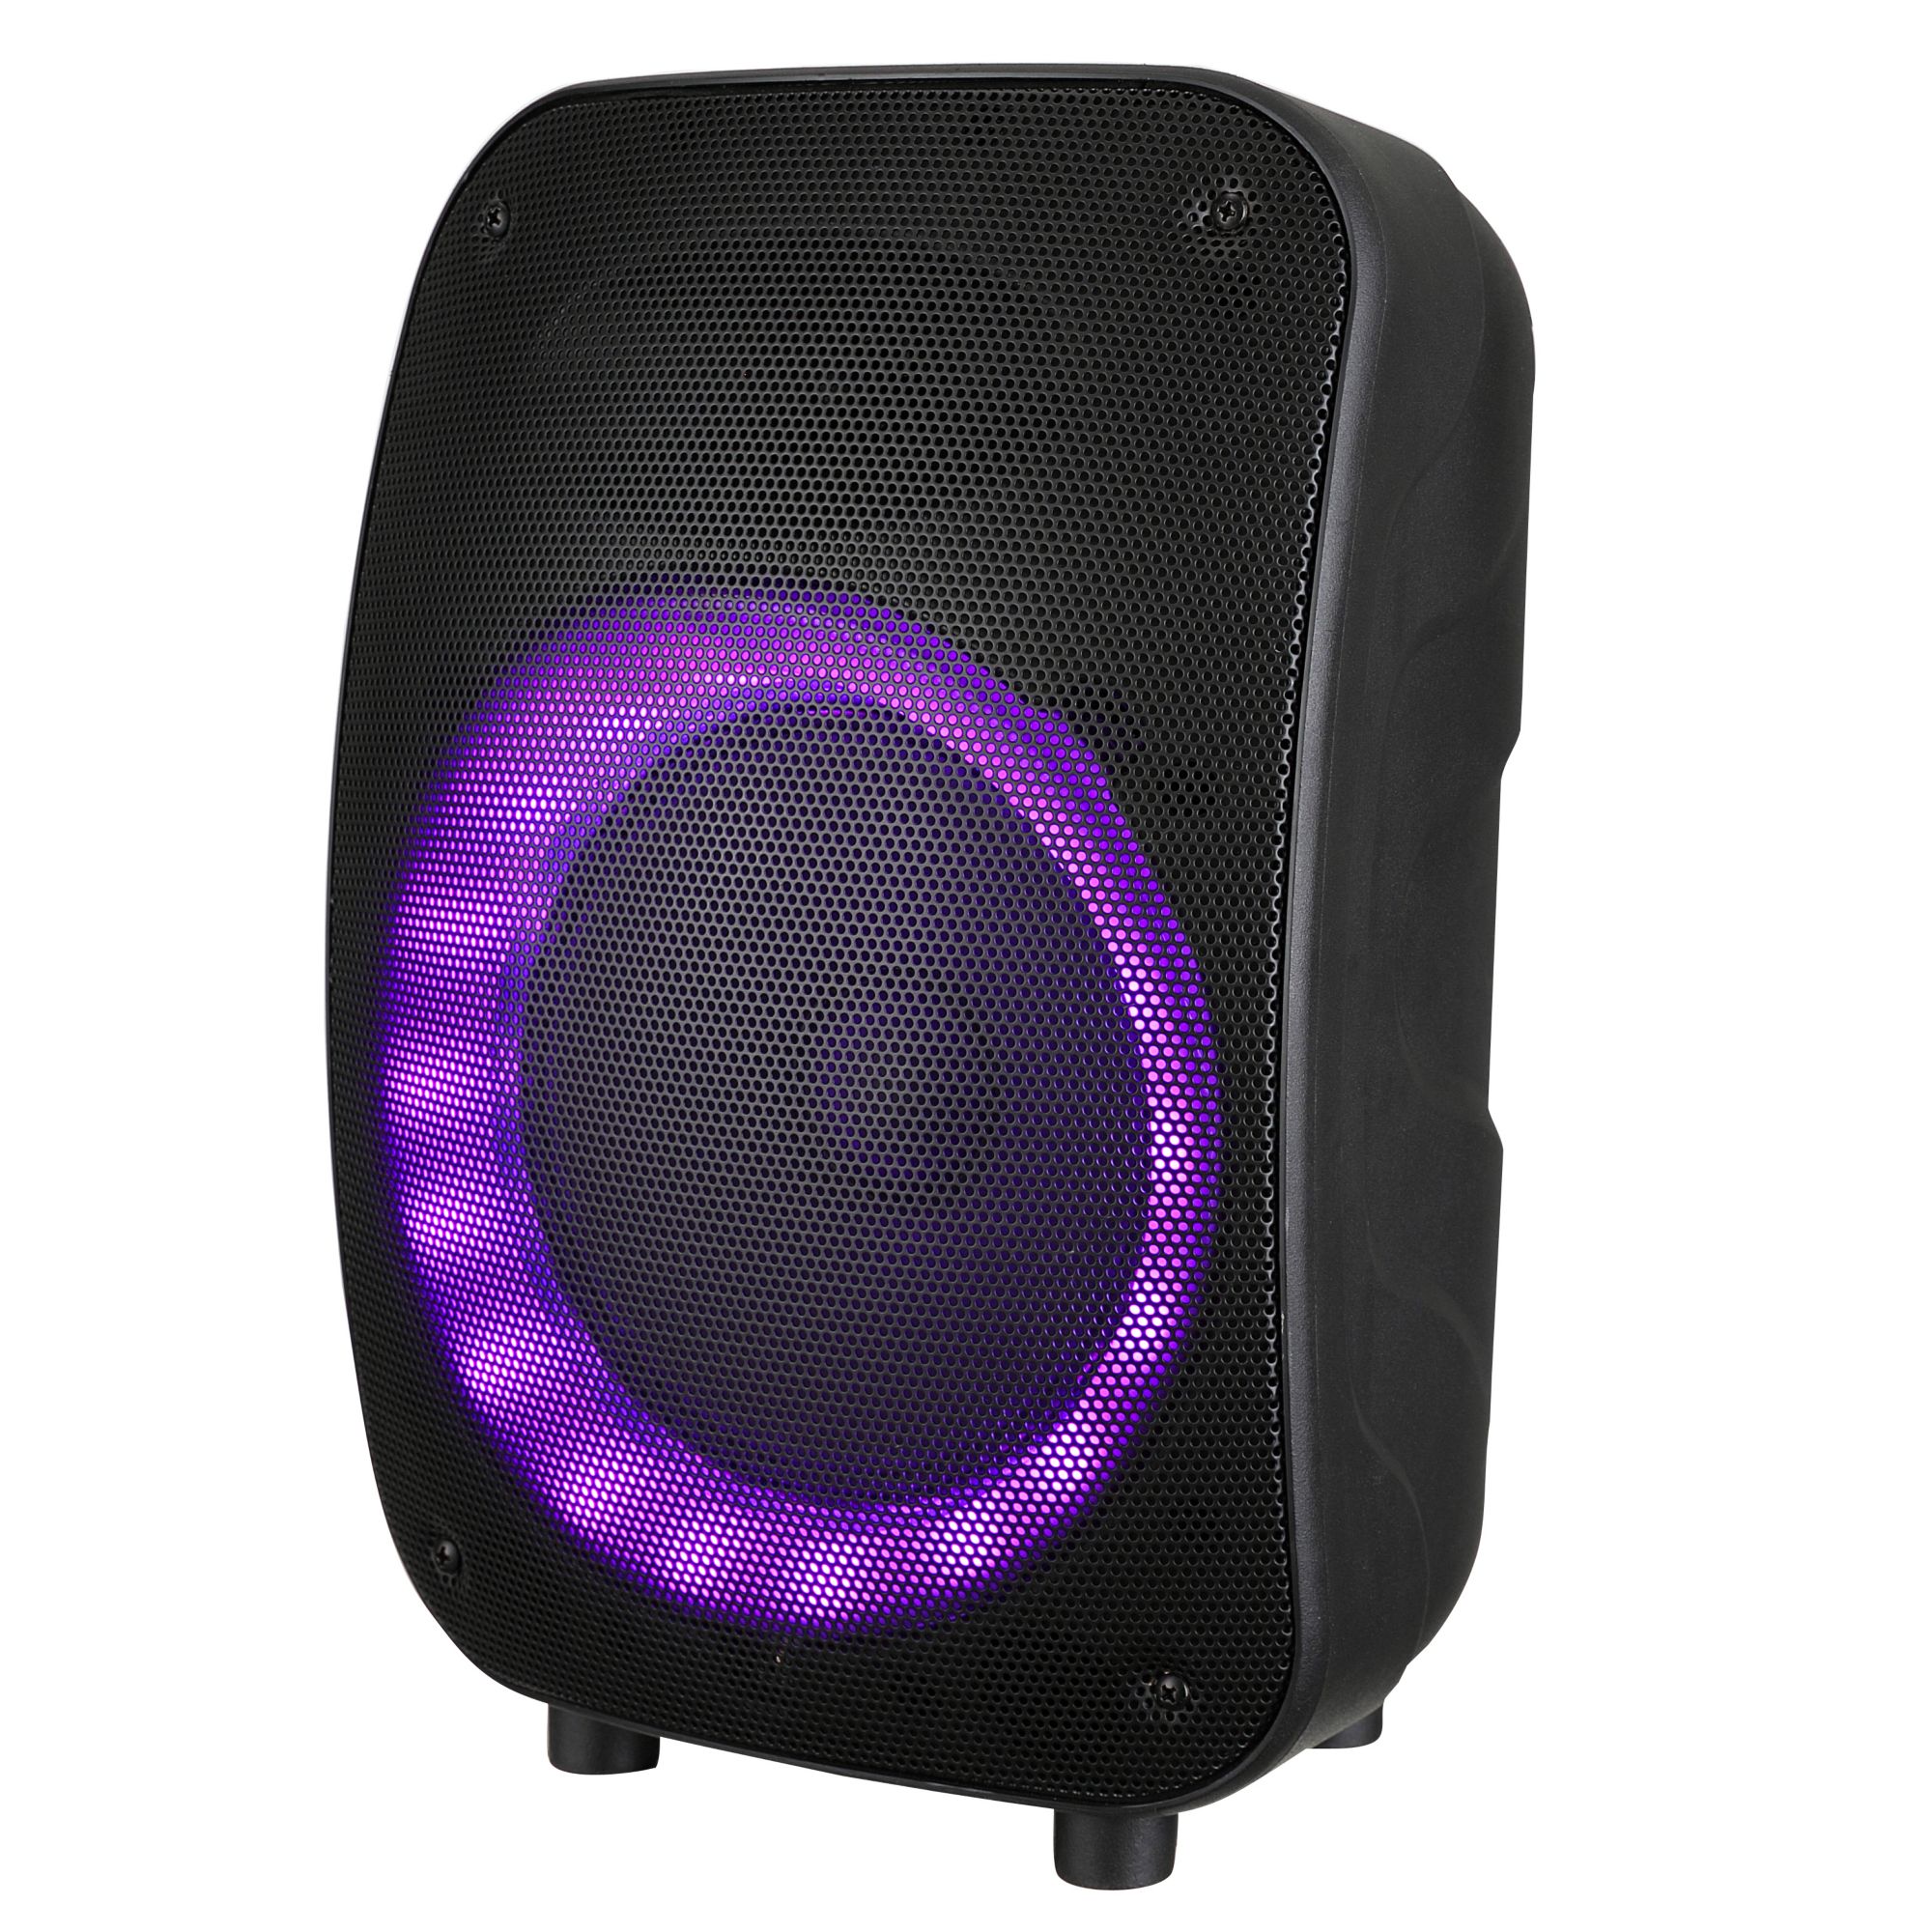 QFX 8 Rechargeable Bluetooth Speaker with LED Party Lights